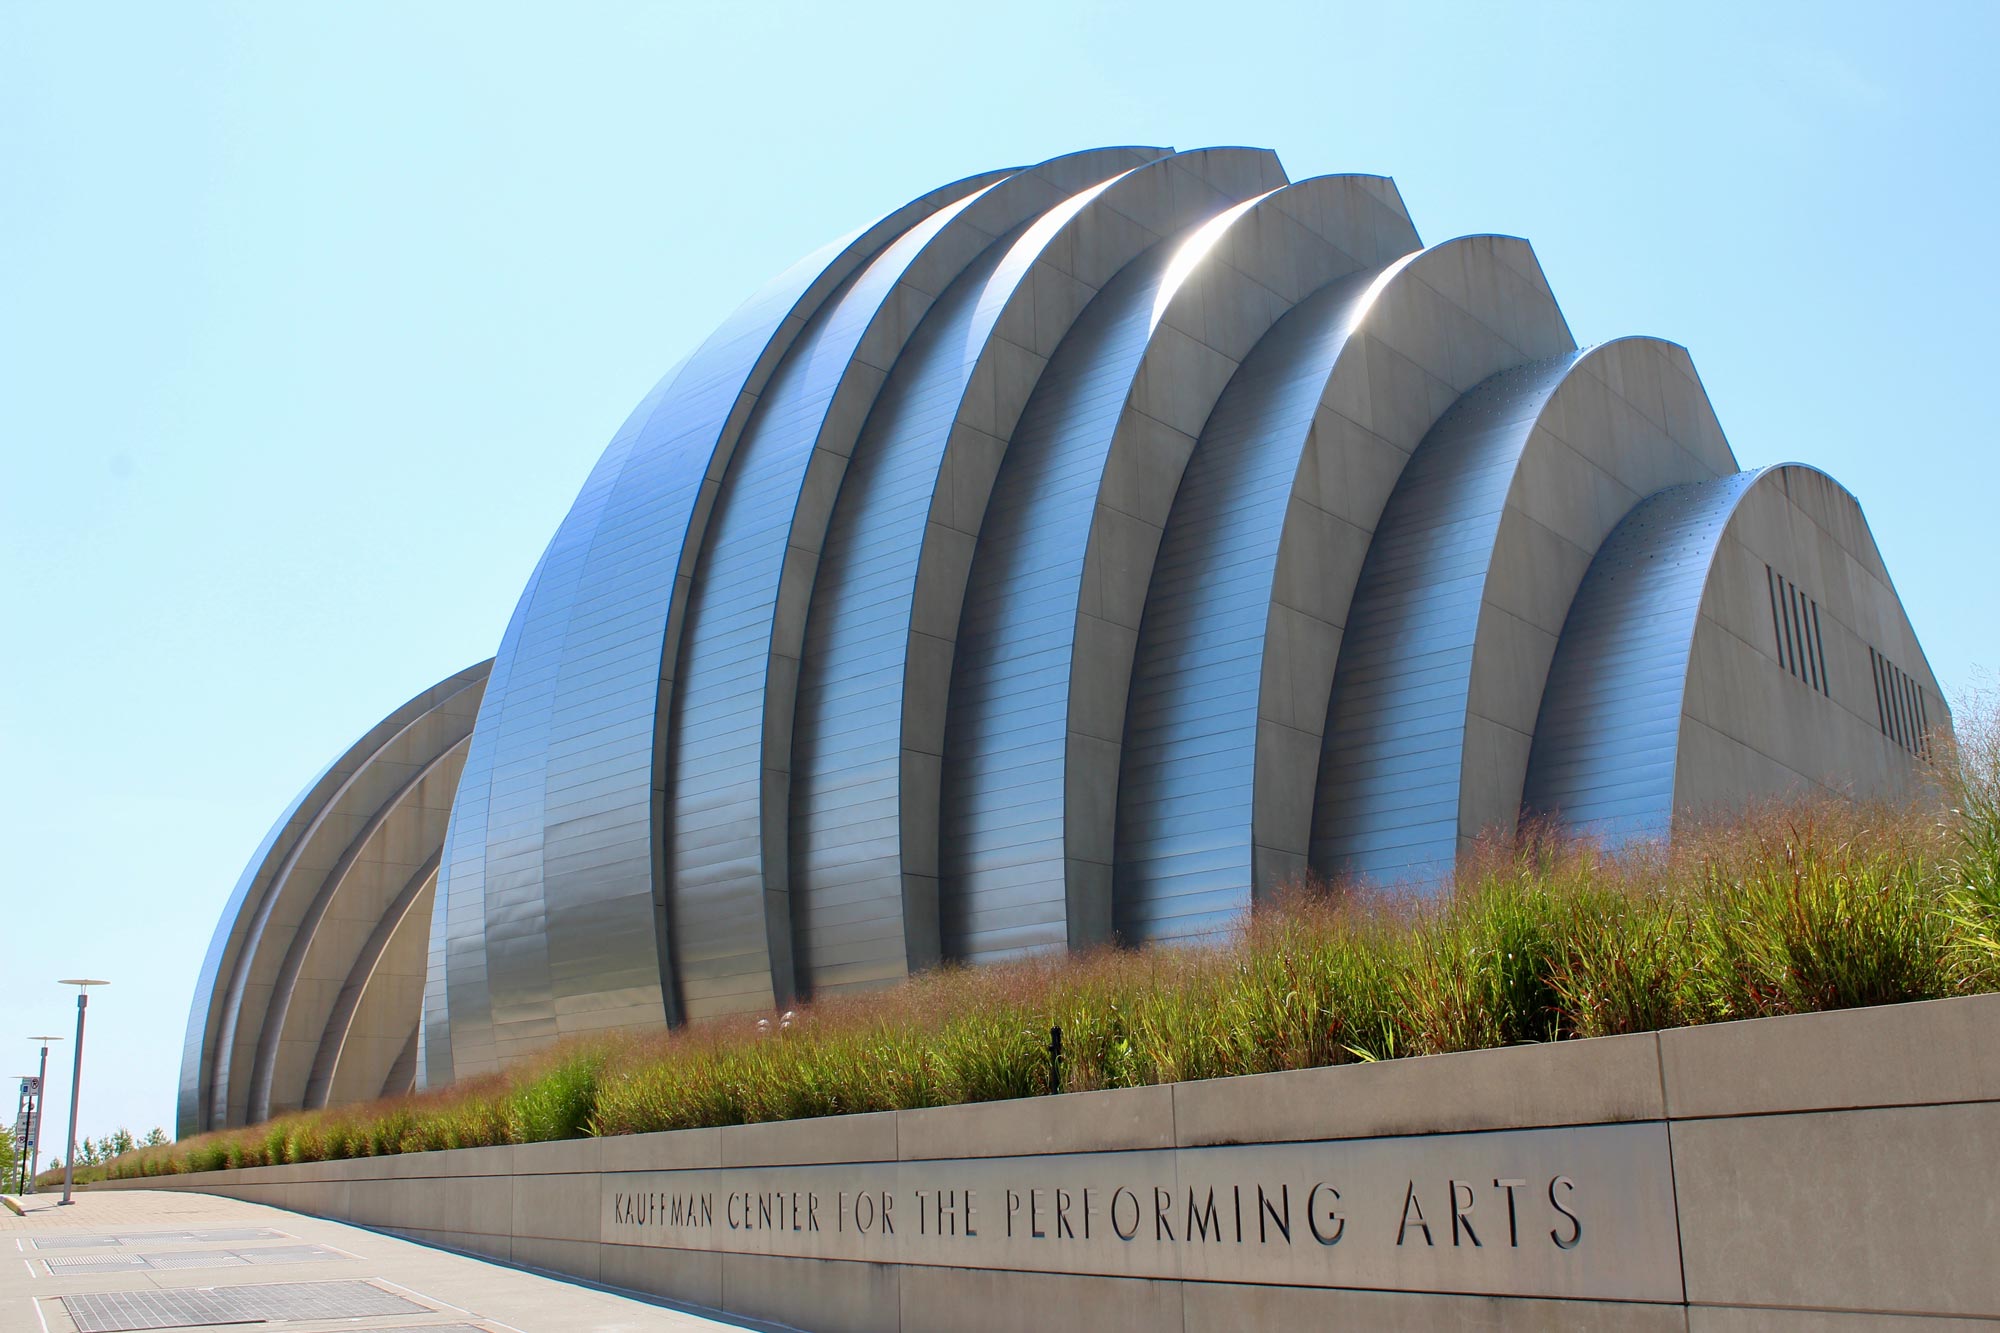 Kauffman Center for the Performing Arts Day